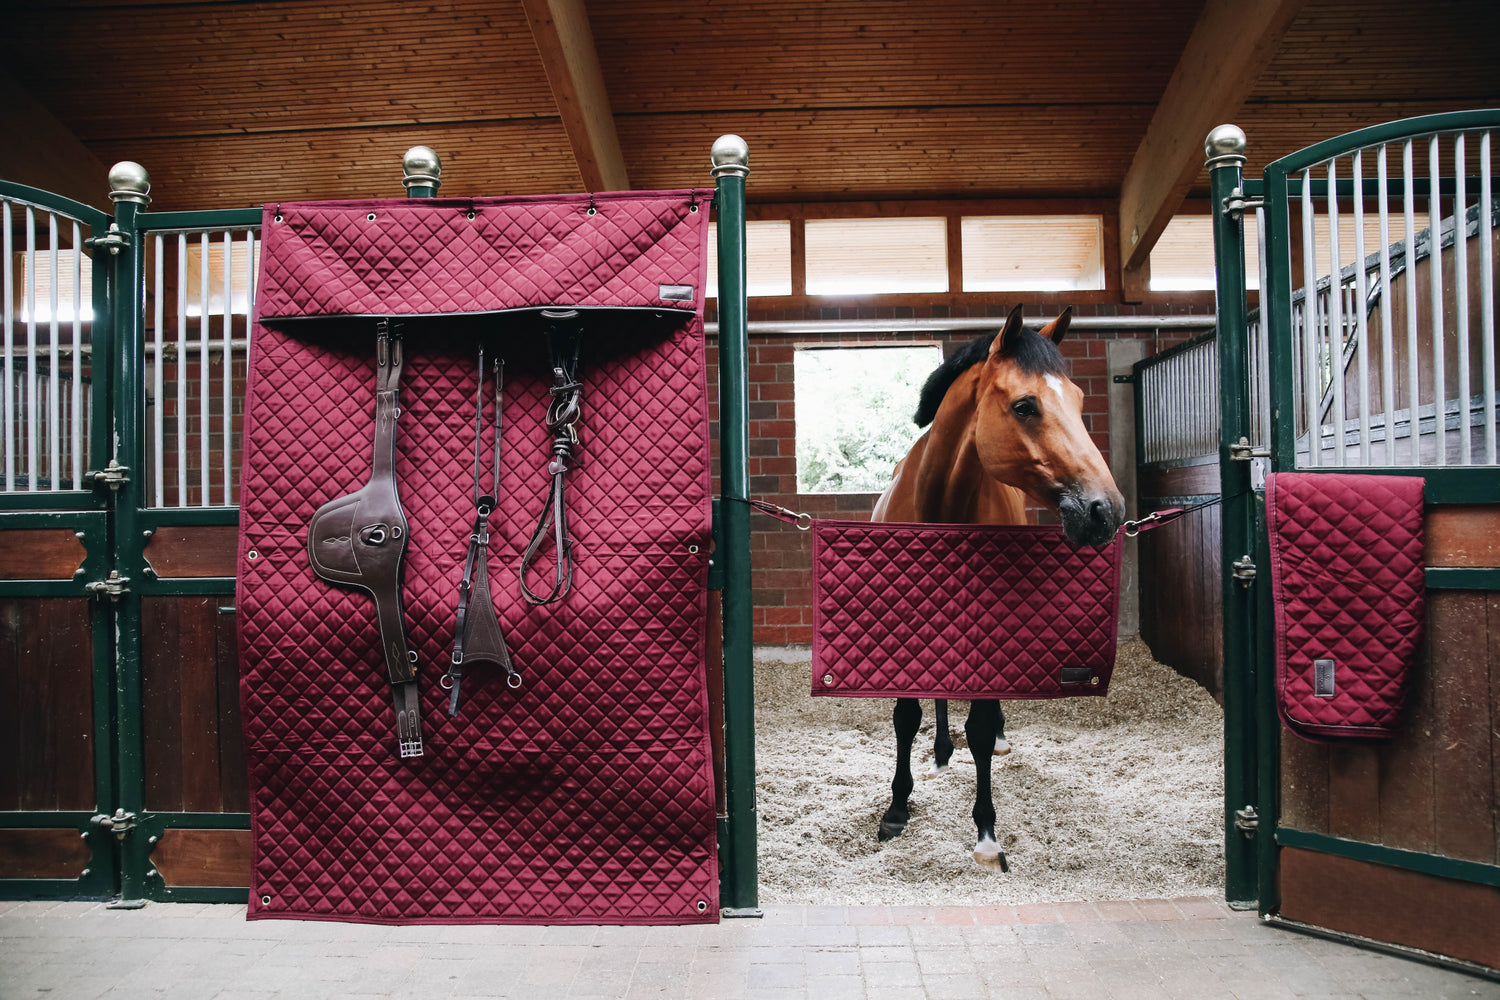 The Kentucky Horsewear Stable Head Protector is the perfect choice to protect your horses head when in the stable. It is super quick and easy to attach with strong Velcro fastenings.